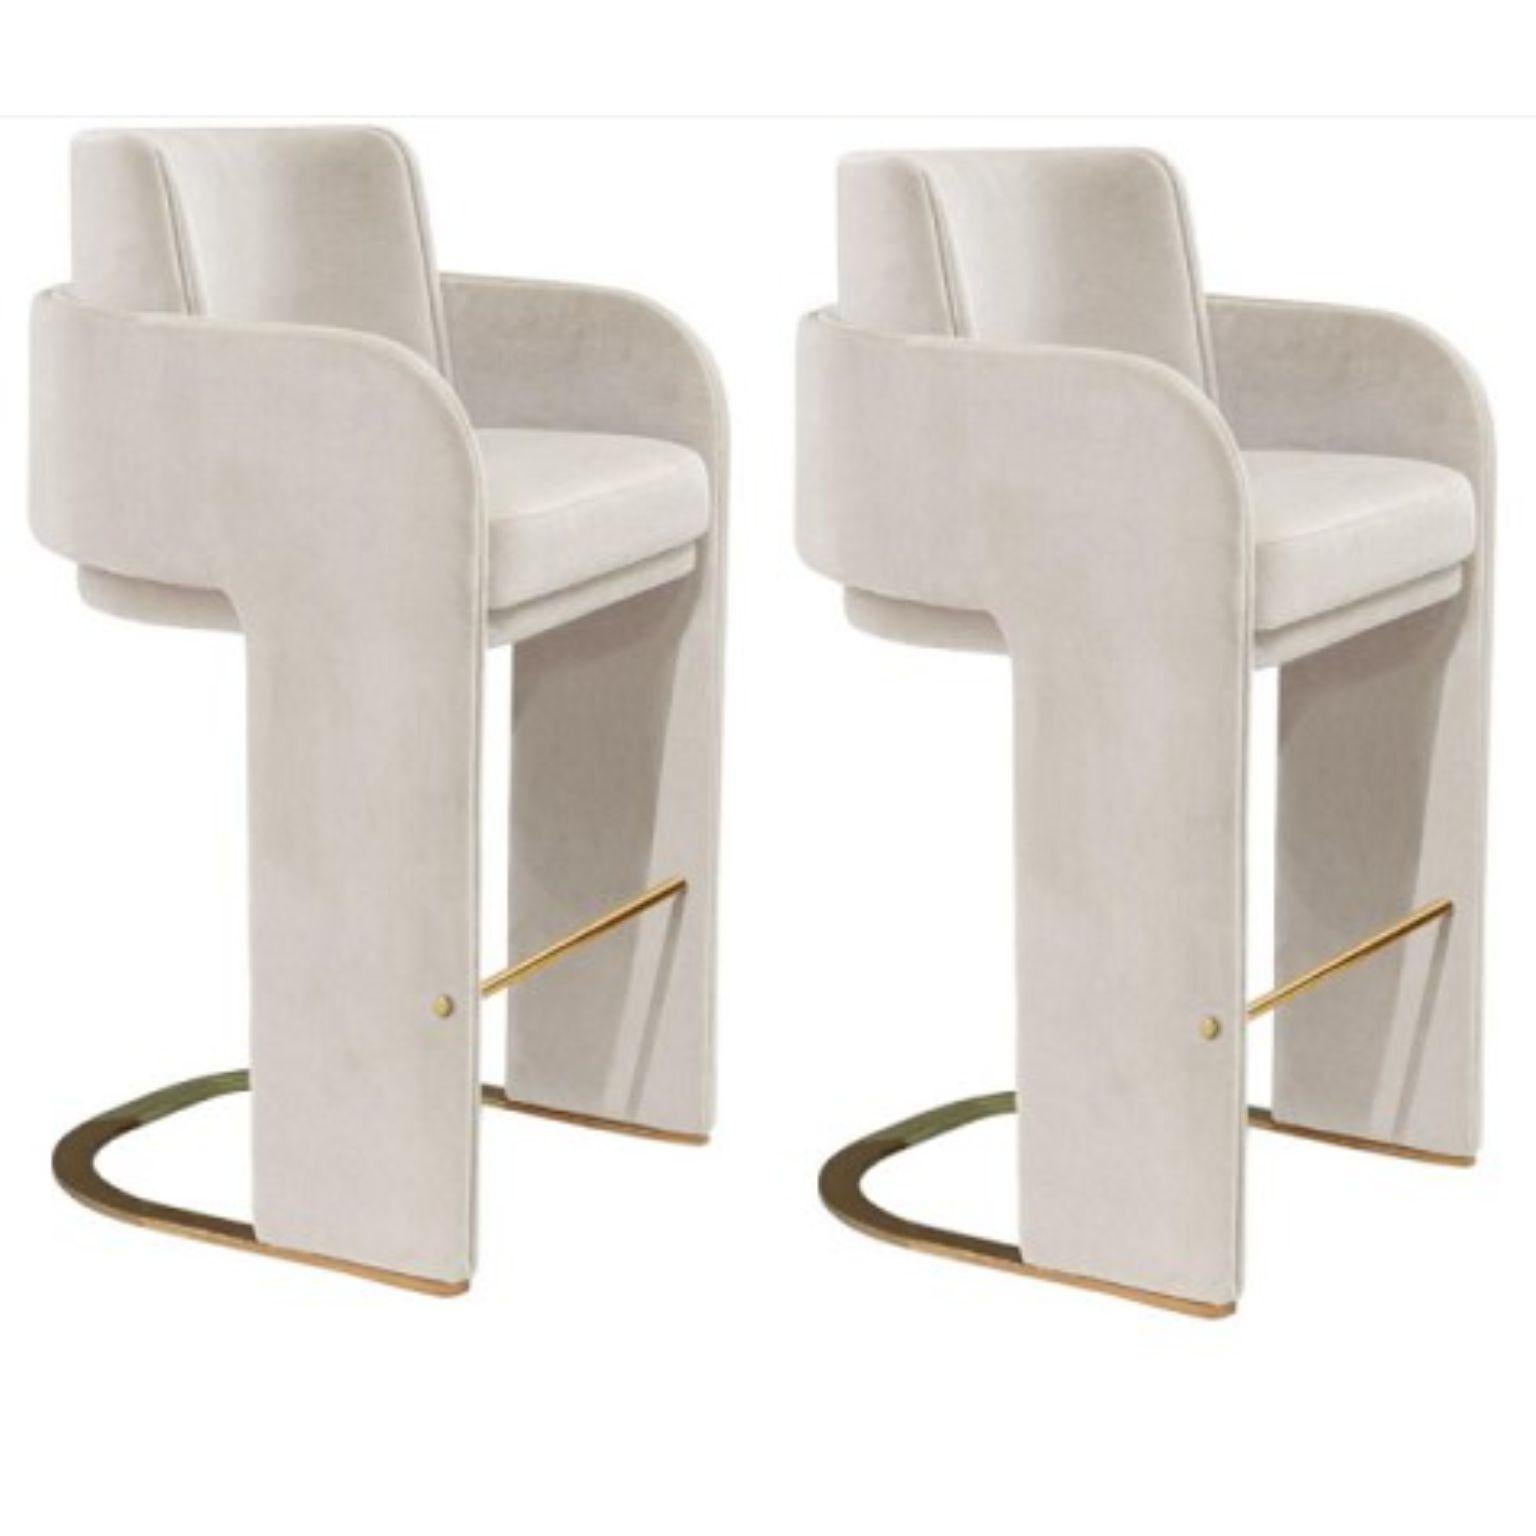 Set of 2 Odisseia bar chairs by DOOQ
Dimensions
W 56 x D 57 x H 105.5 x Seat H 75 cm

Materials and finishes
Base and feet in stainless steel plated polished or satin: brass, copper or nickel. Upholstery: seat, armrests and back fully